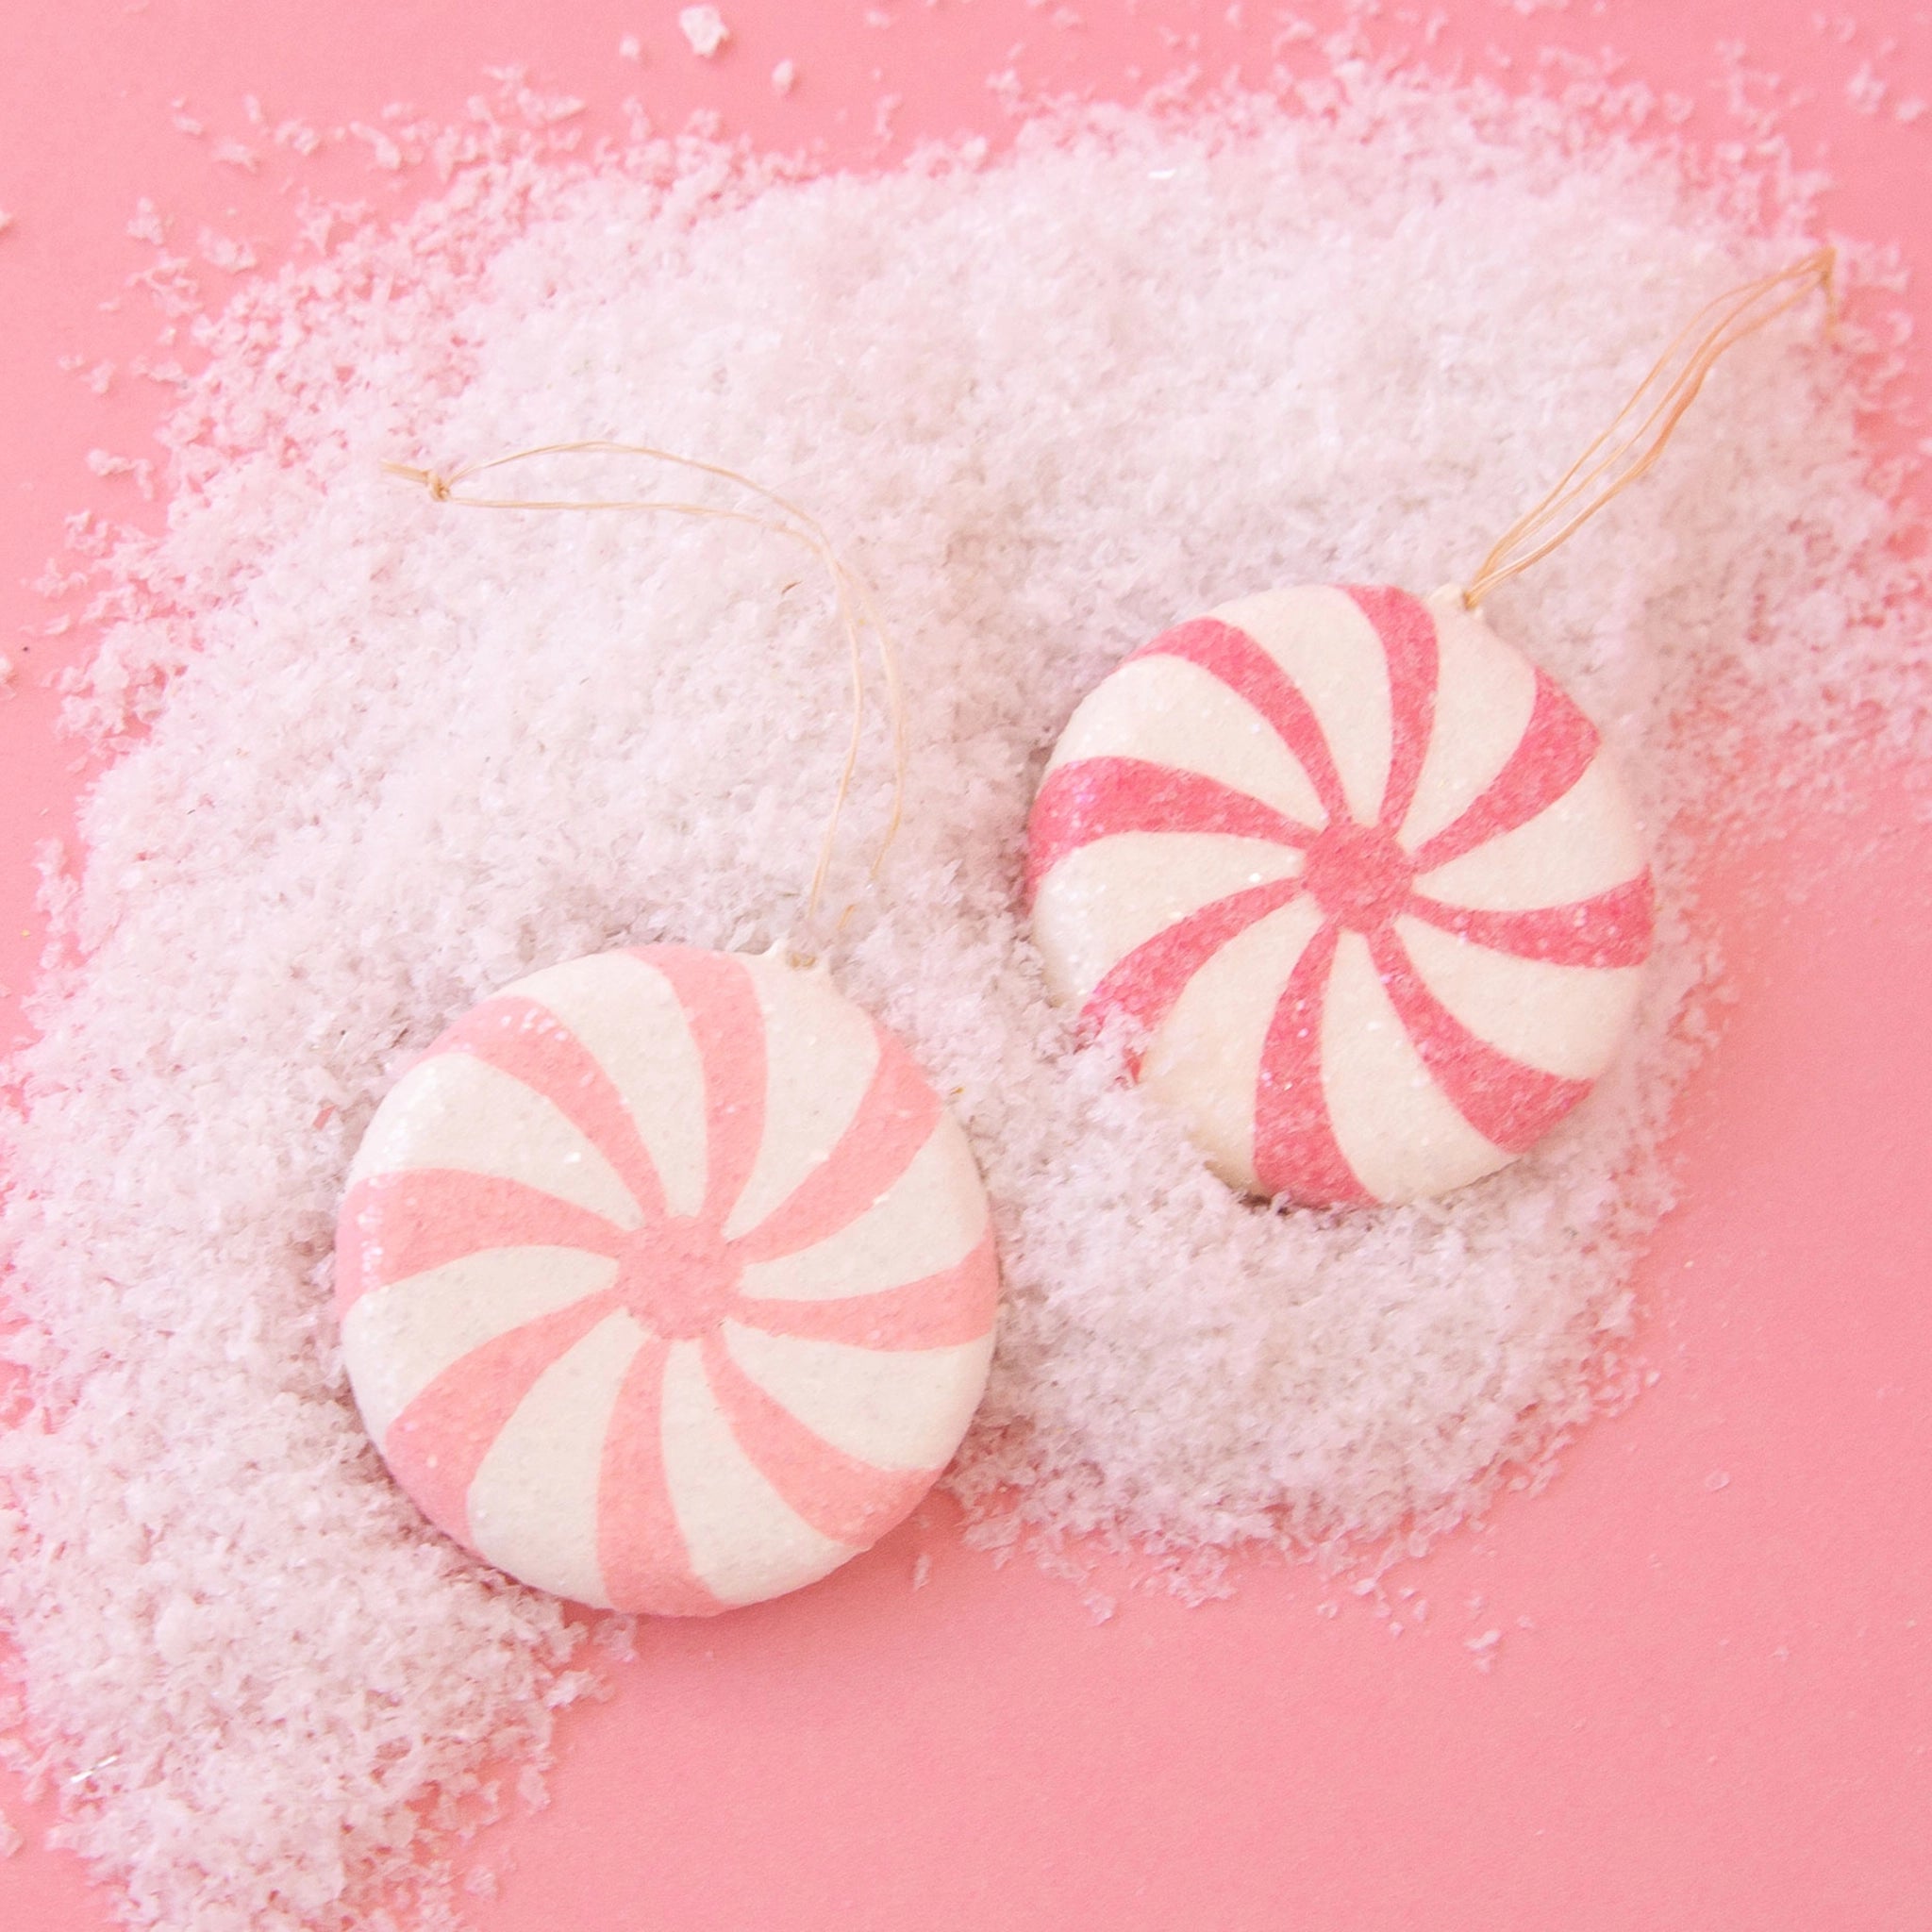 On a pink snowy background is two peppermint shaped ornaments. 